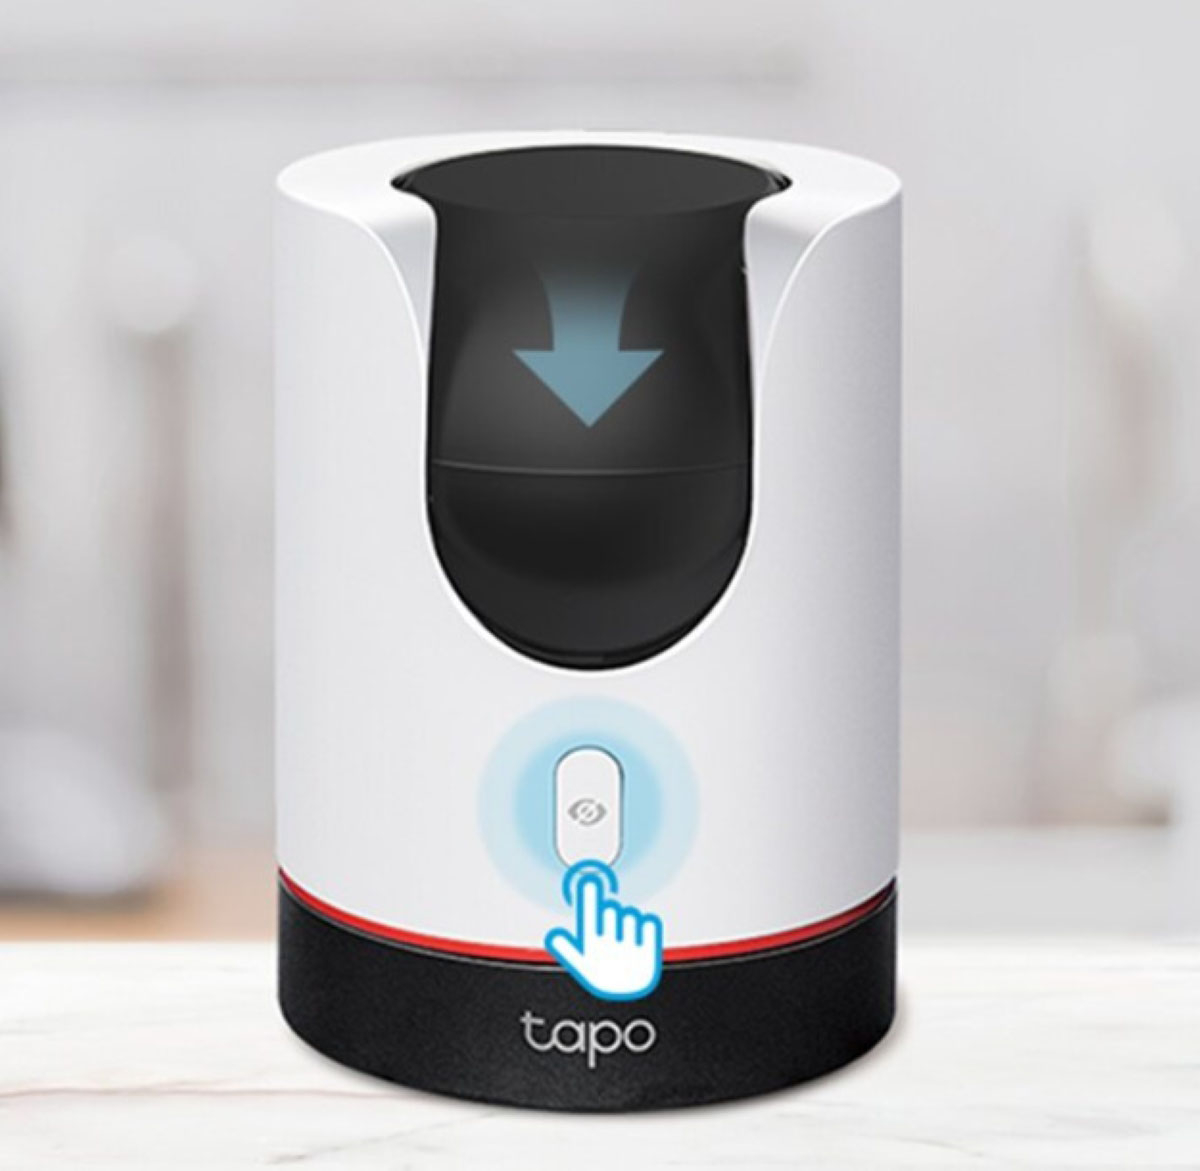 TP-Link Tapo 2K pan and tilt home security camera falls to new lows from  $27.50 each